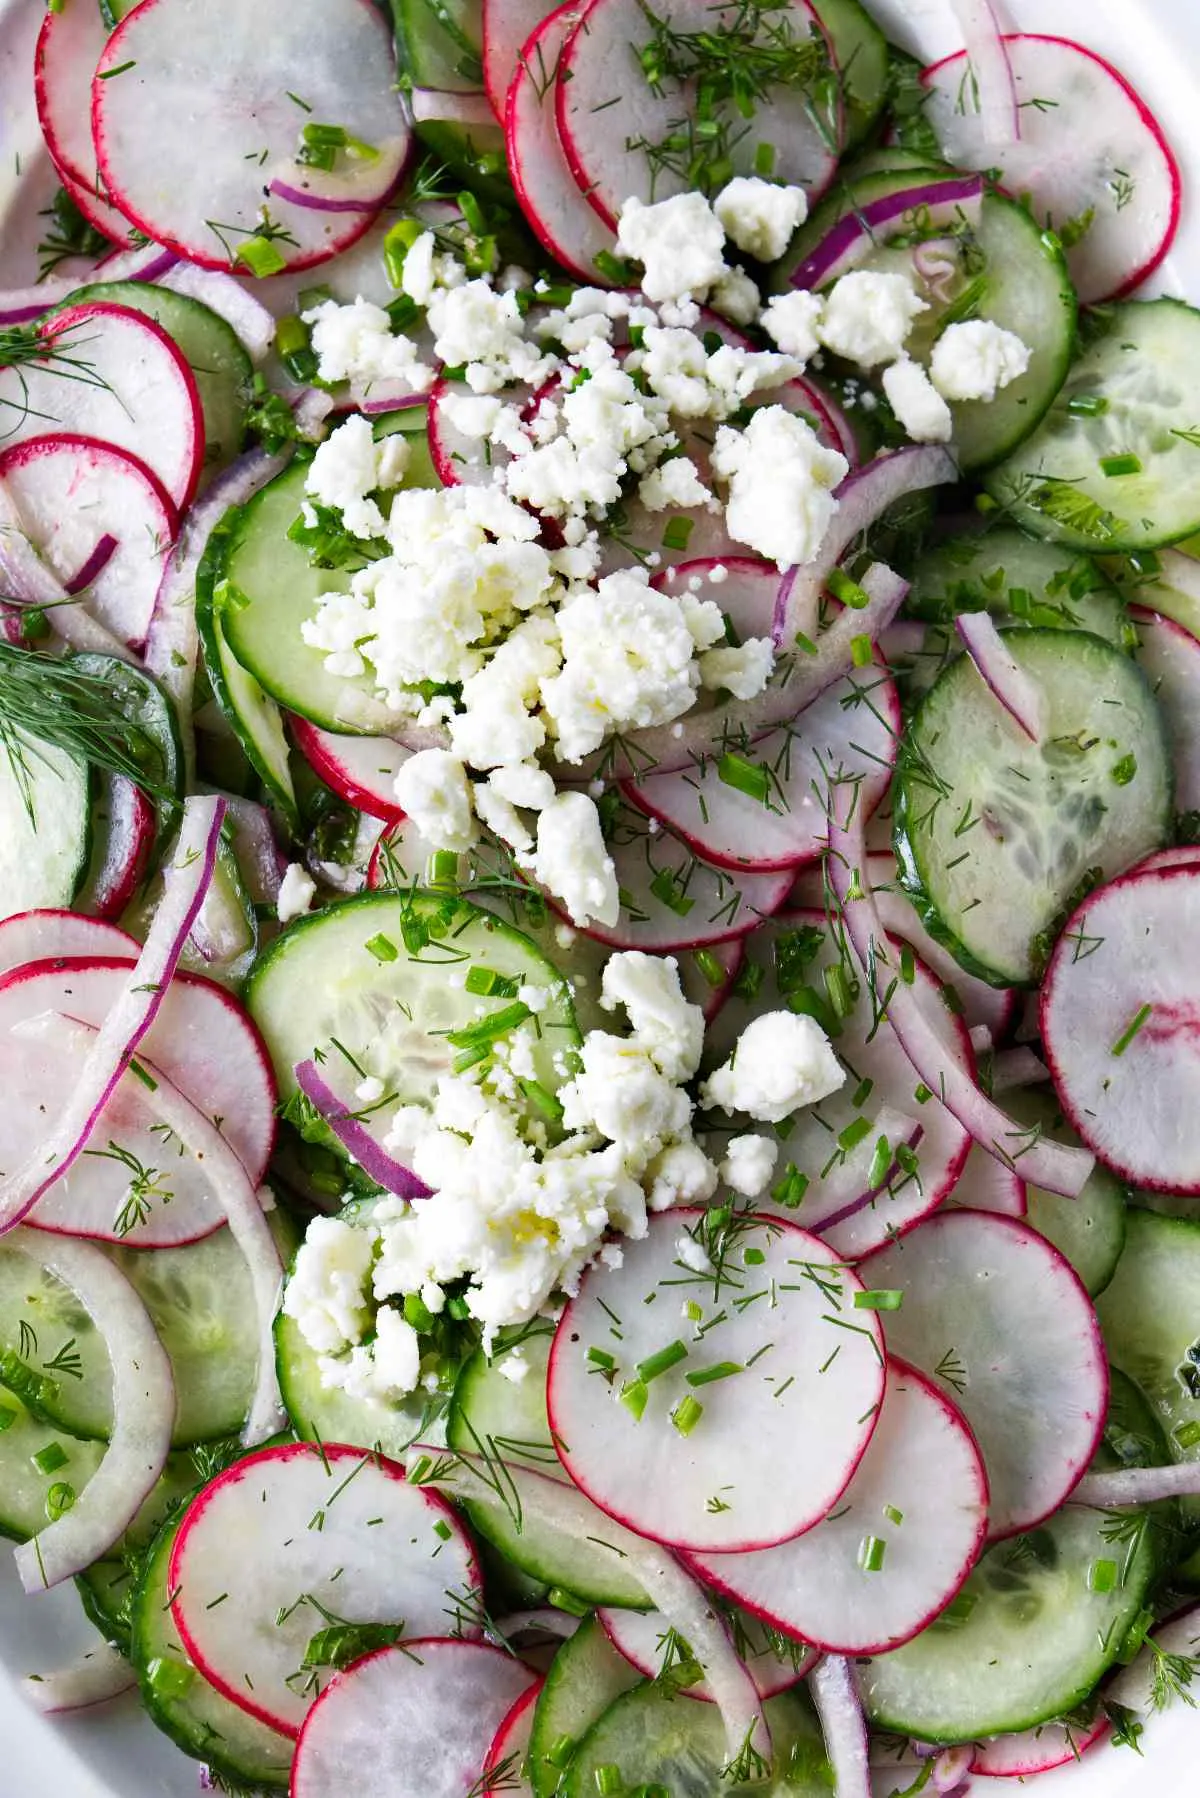 A bowl filled with cucumbers, radishes, red onions, and herbs.